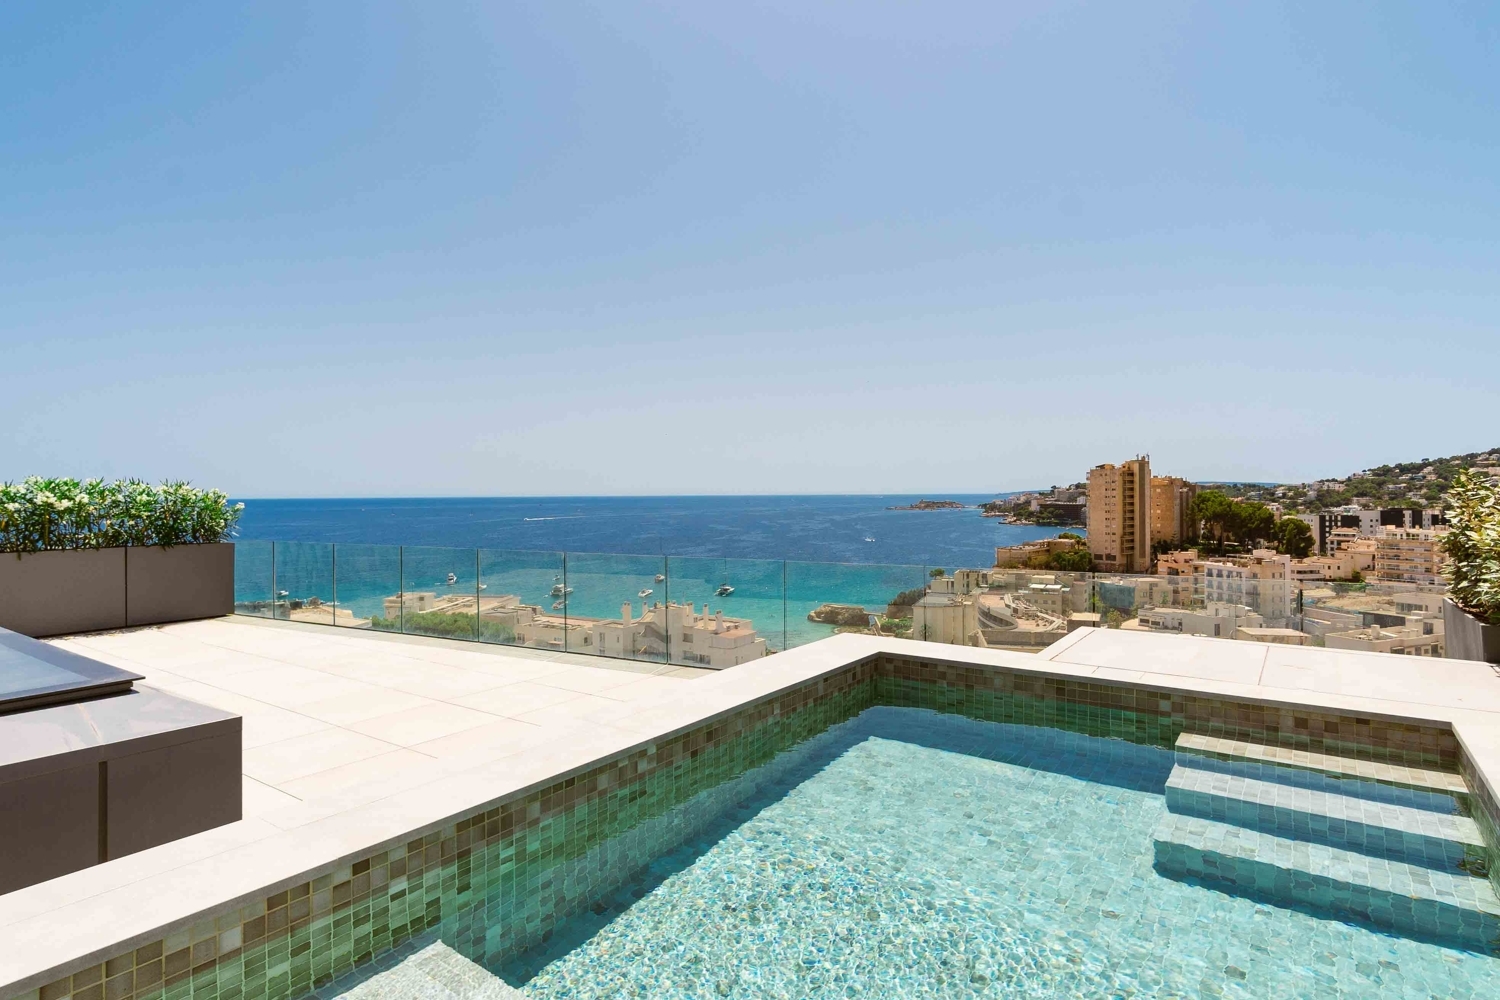 PENTHOUSE IN CALA MAYOR MIT PRIVATER TERRASSE UND POOL